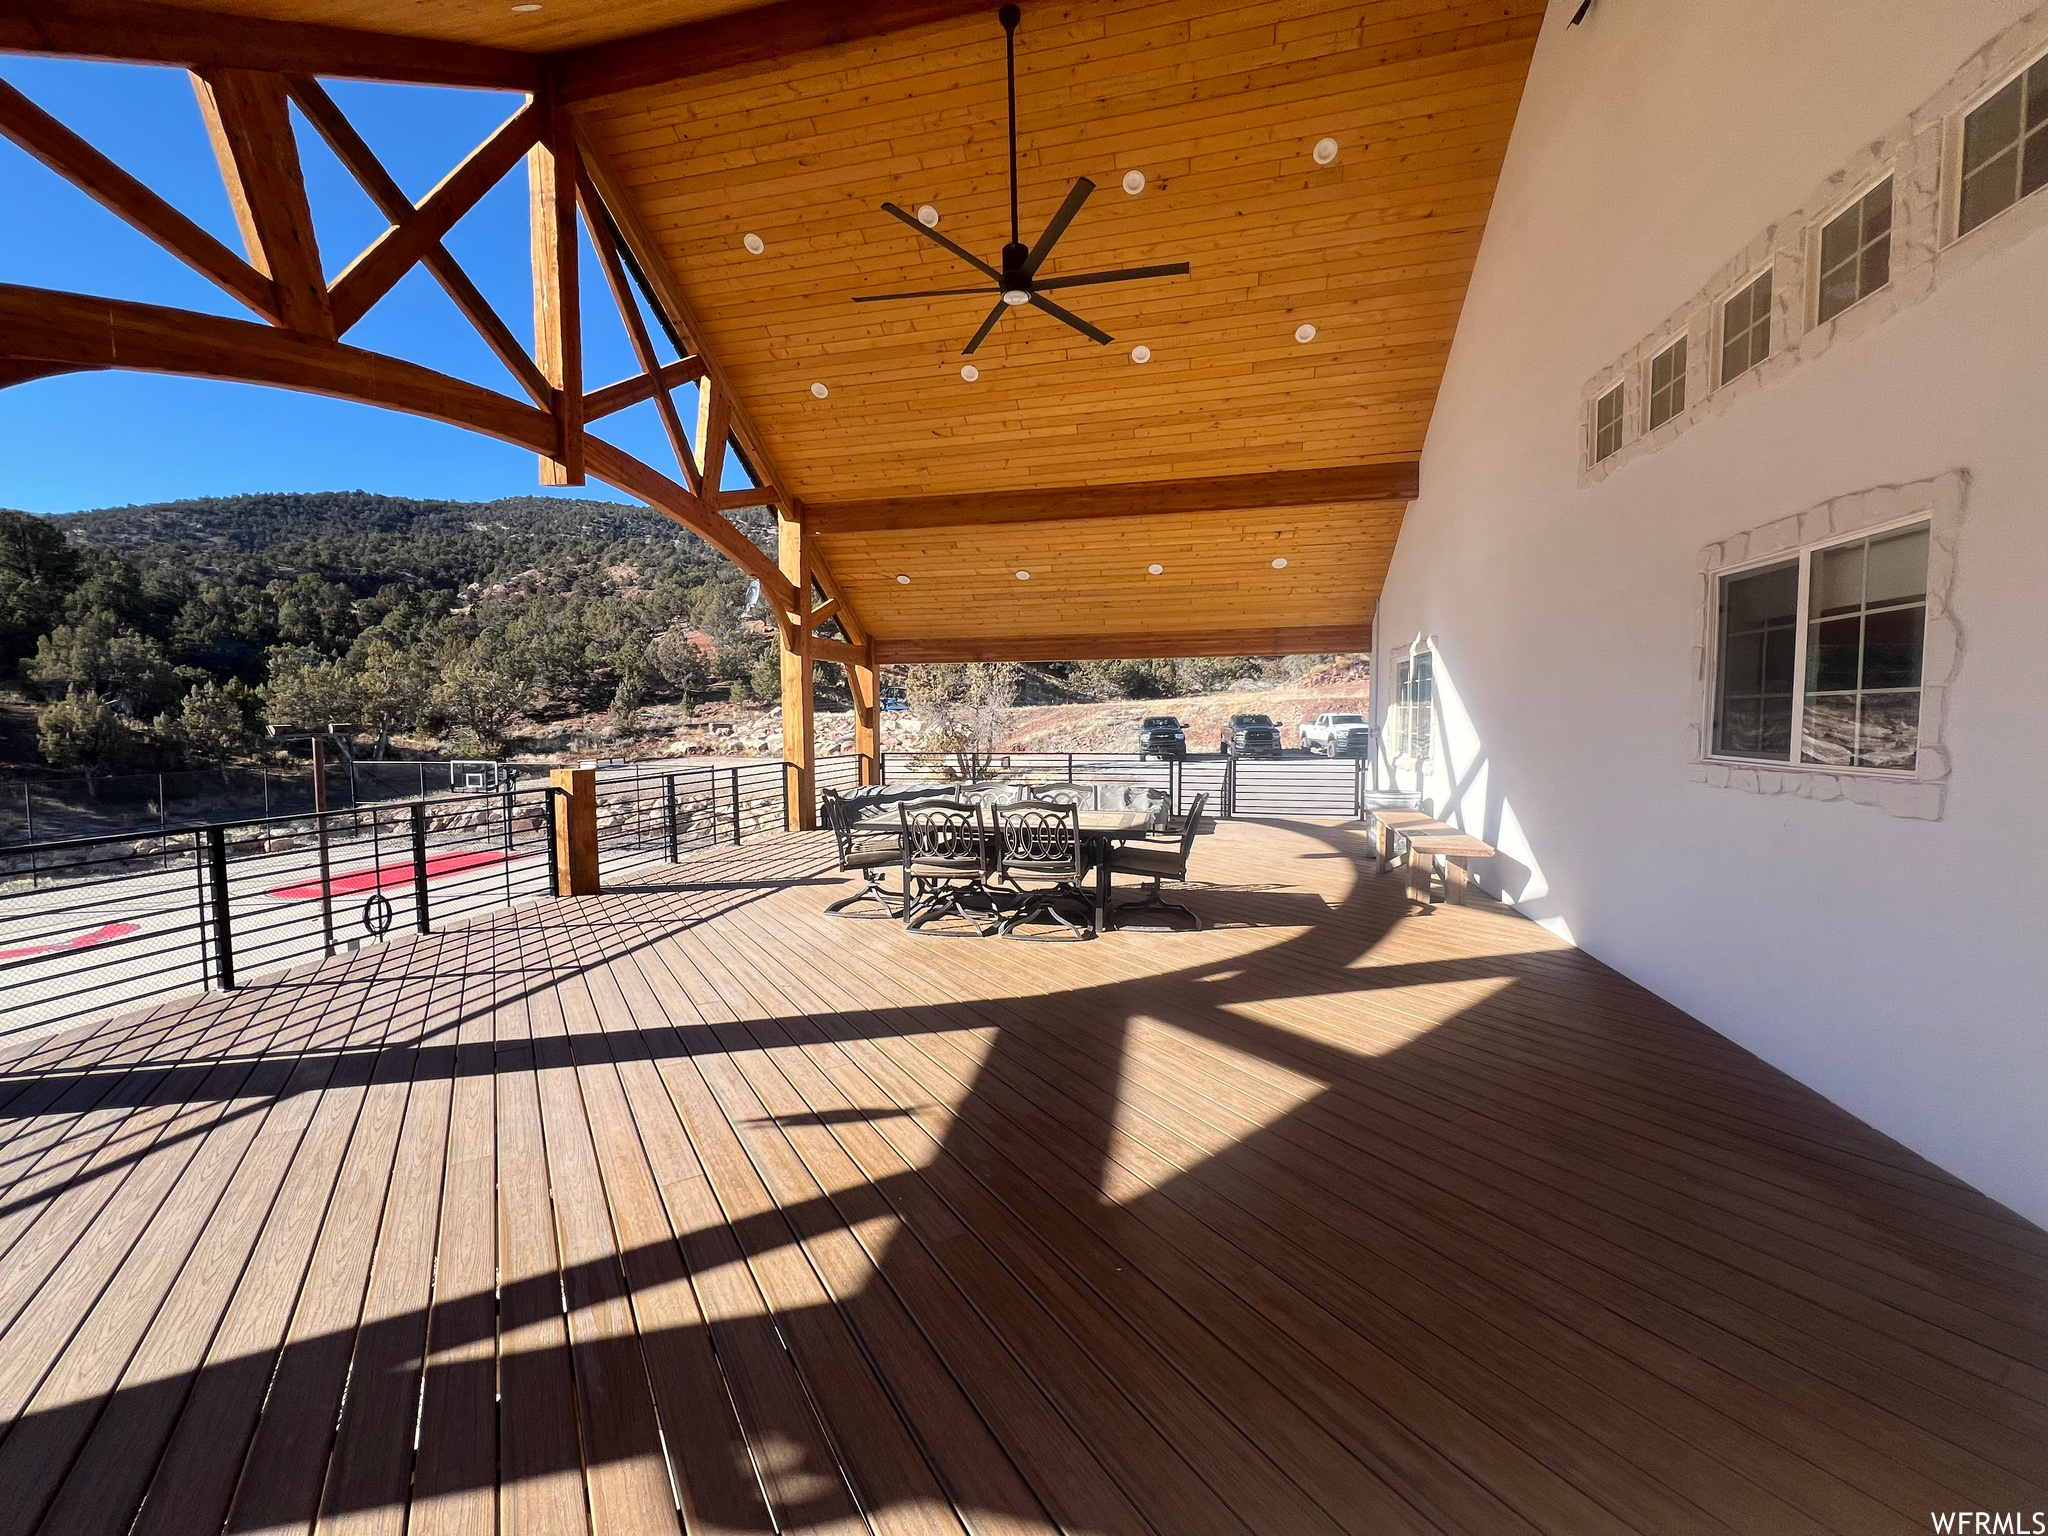 Wooden terrace with ceiling fan and a mountain view